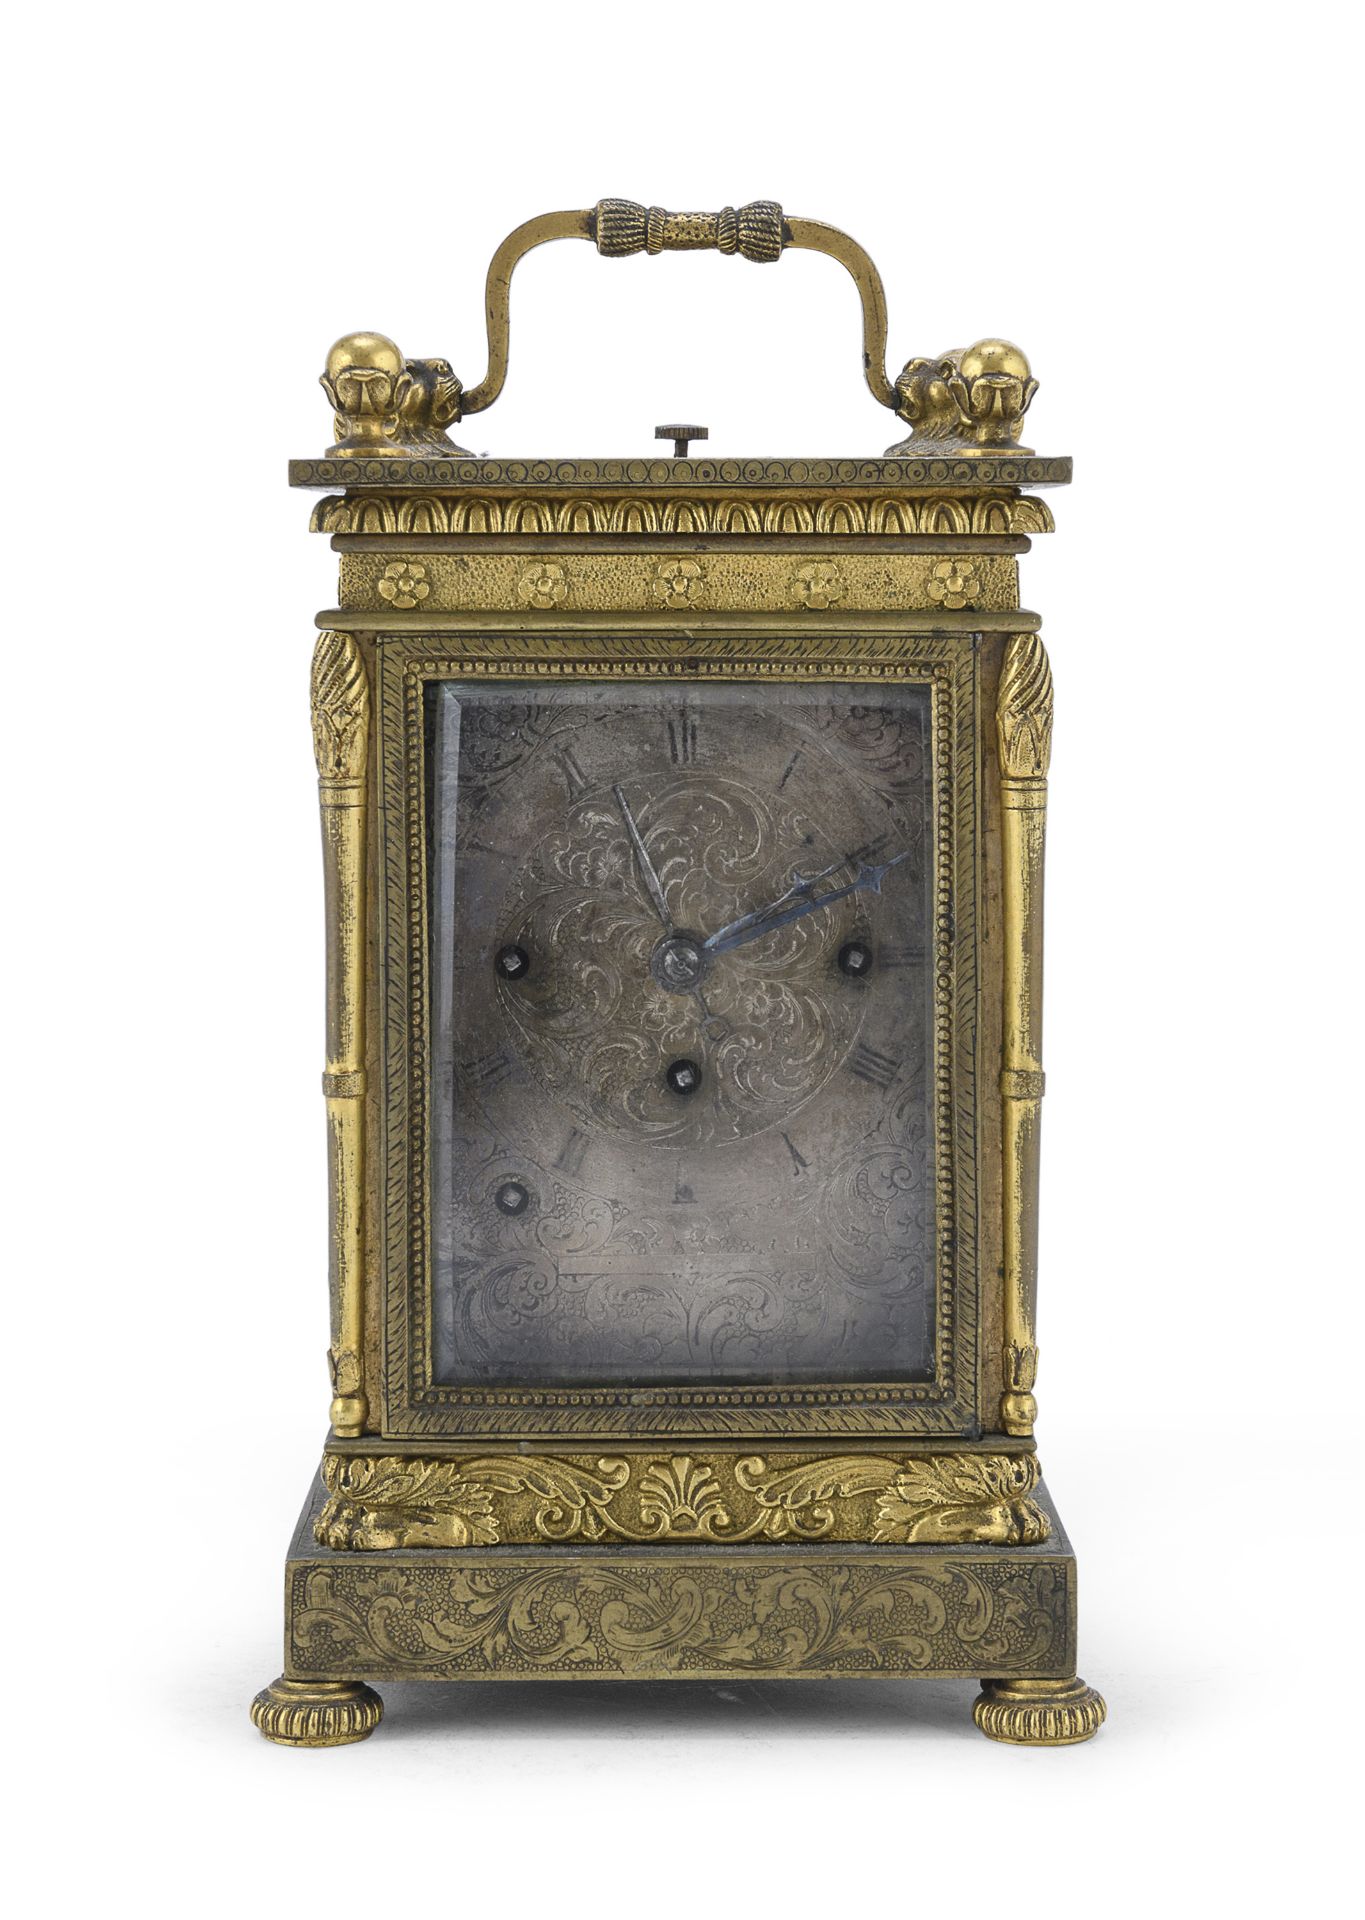 CARRIAGE CLOCK LATE 18TH CENTURY